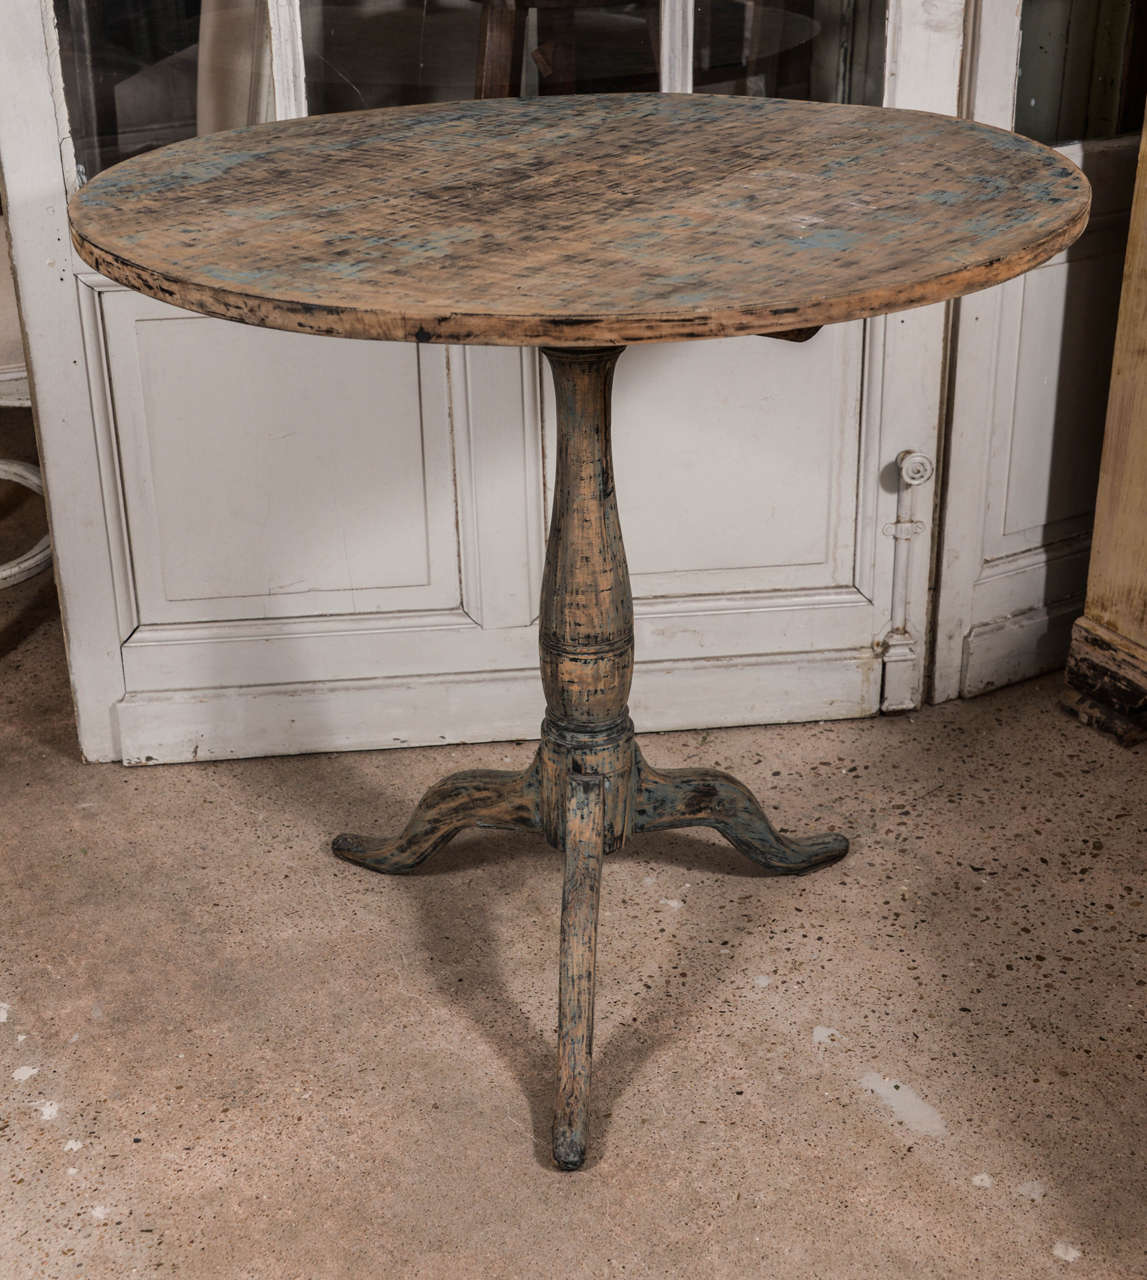 19th century tilt-top pedestal table with remnants of original blue and black paint.